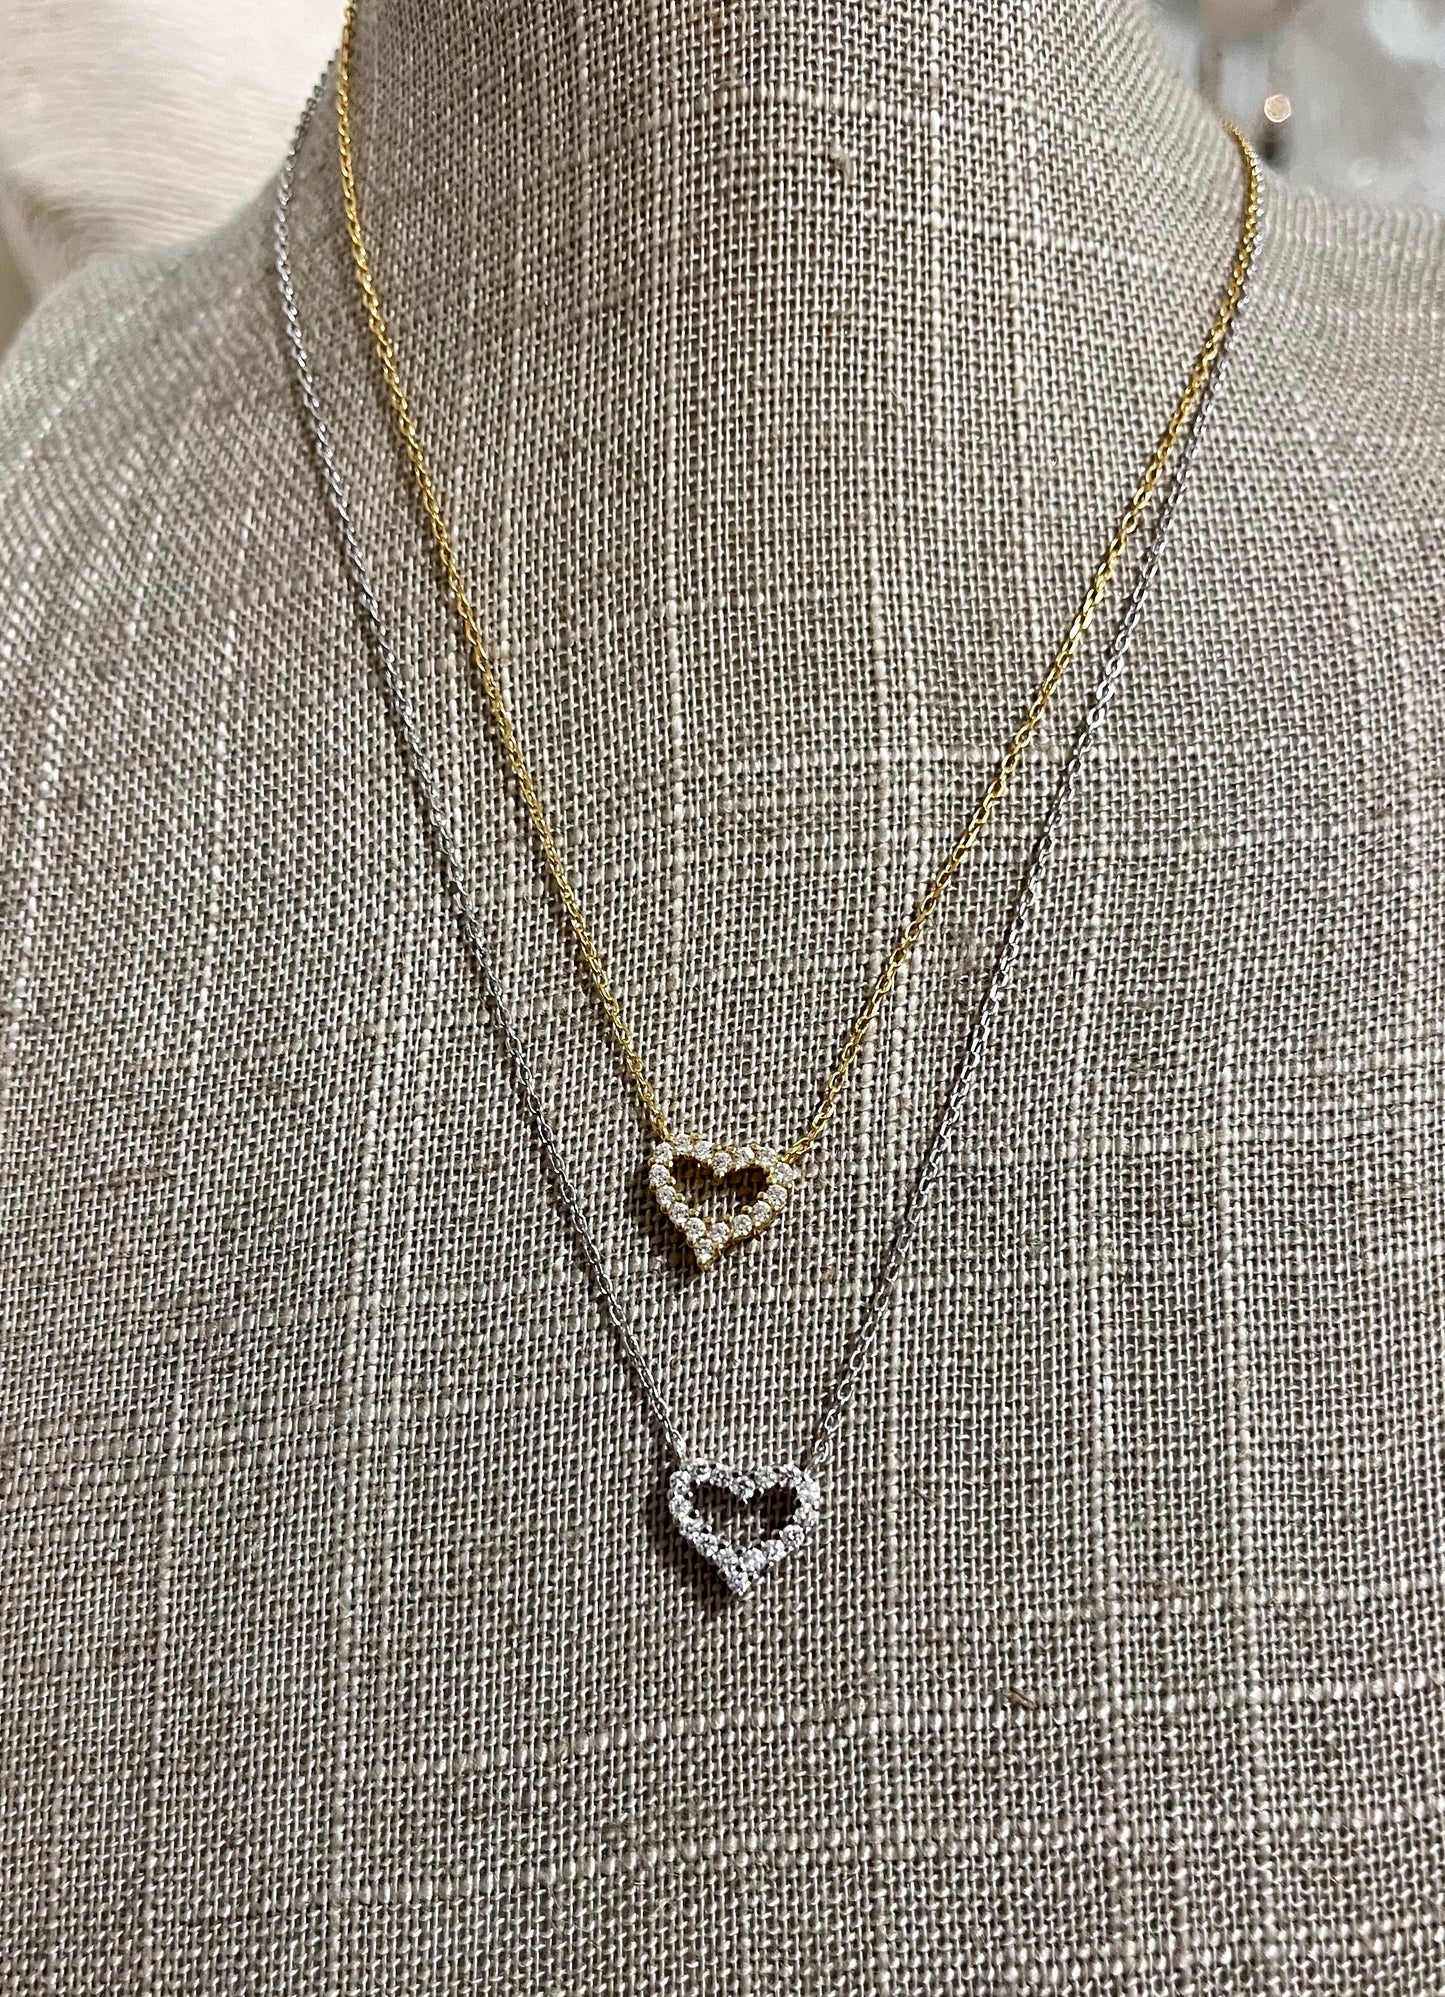 Heart solitaire necklace